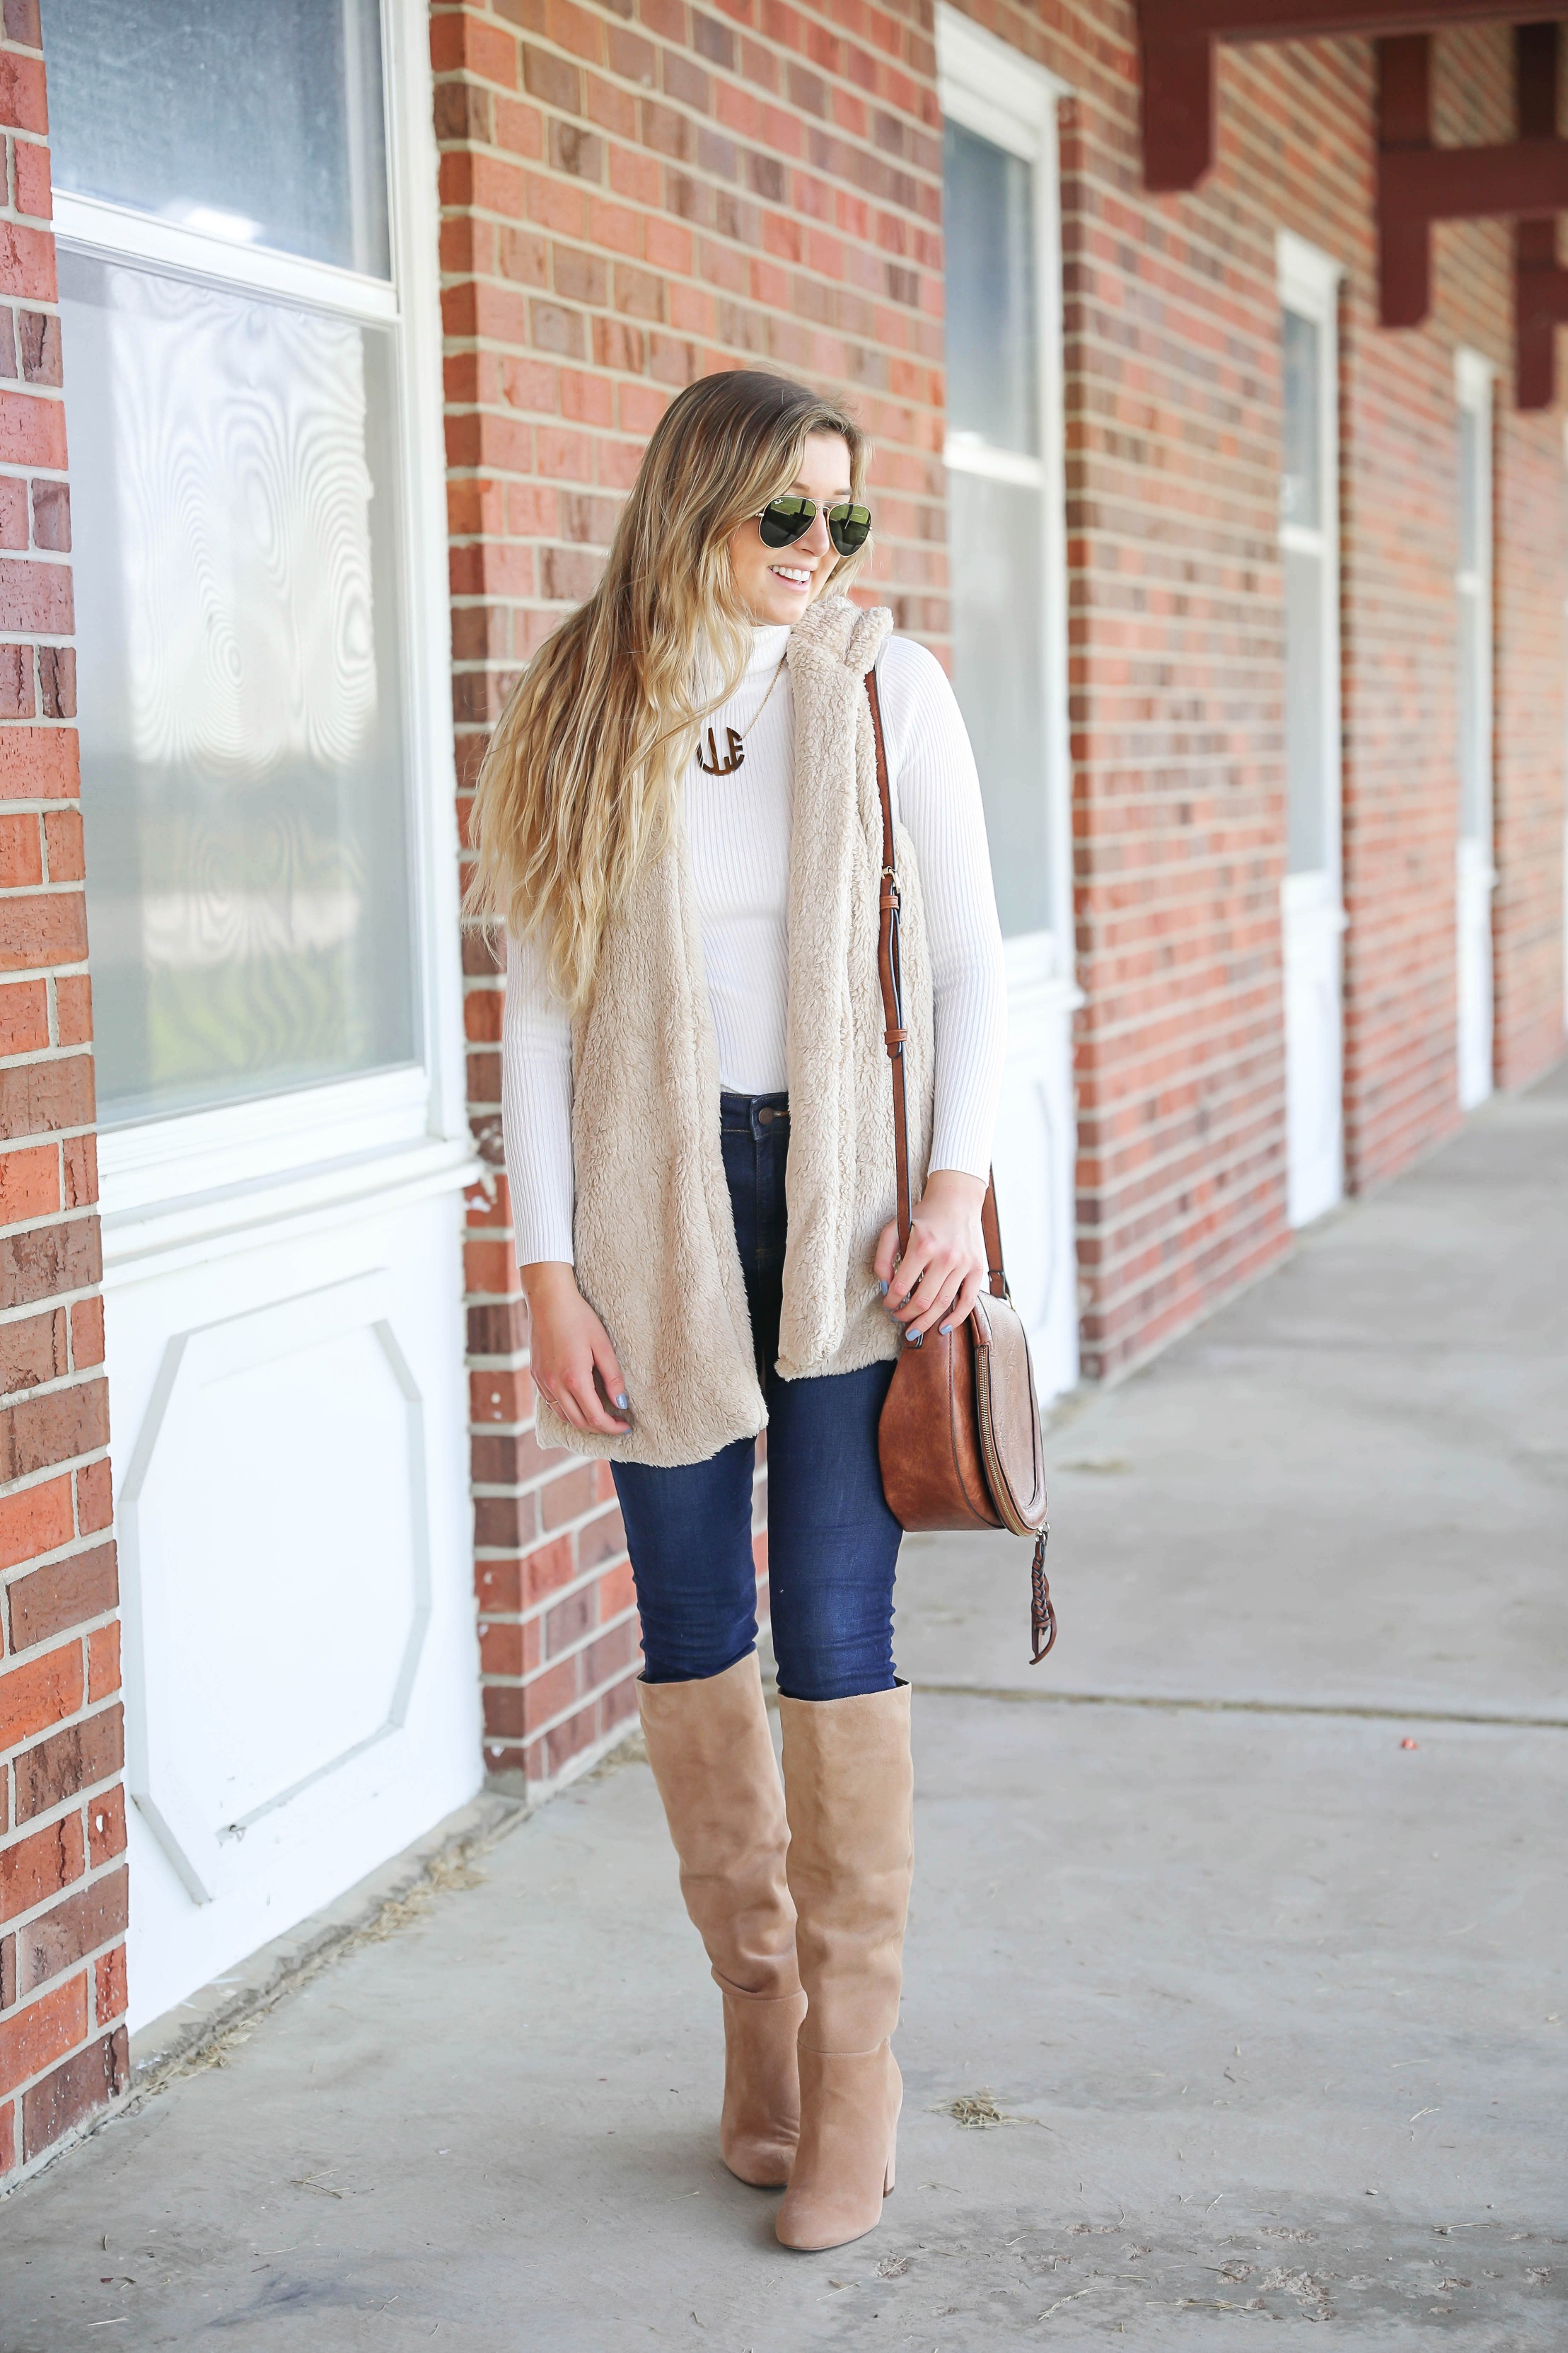 Teddy bear vest for fall! I love soft clothing and this long vest makes for the perfect fall outfit! I paired with a cute white turtleneck and monogram necklace! Plus my favorite shoes for fall are these tan sam edelman boots! Details on fashion blog daily dose of charm by lauren lindmark